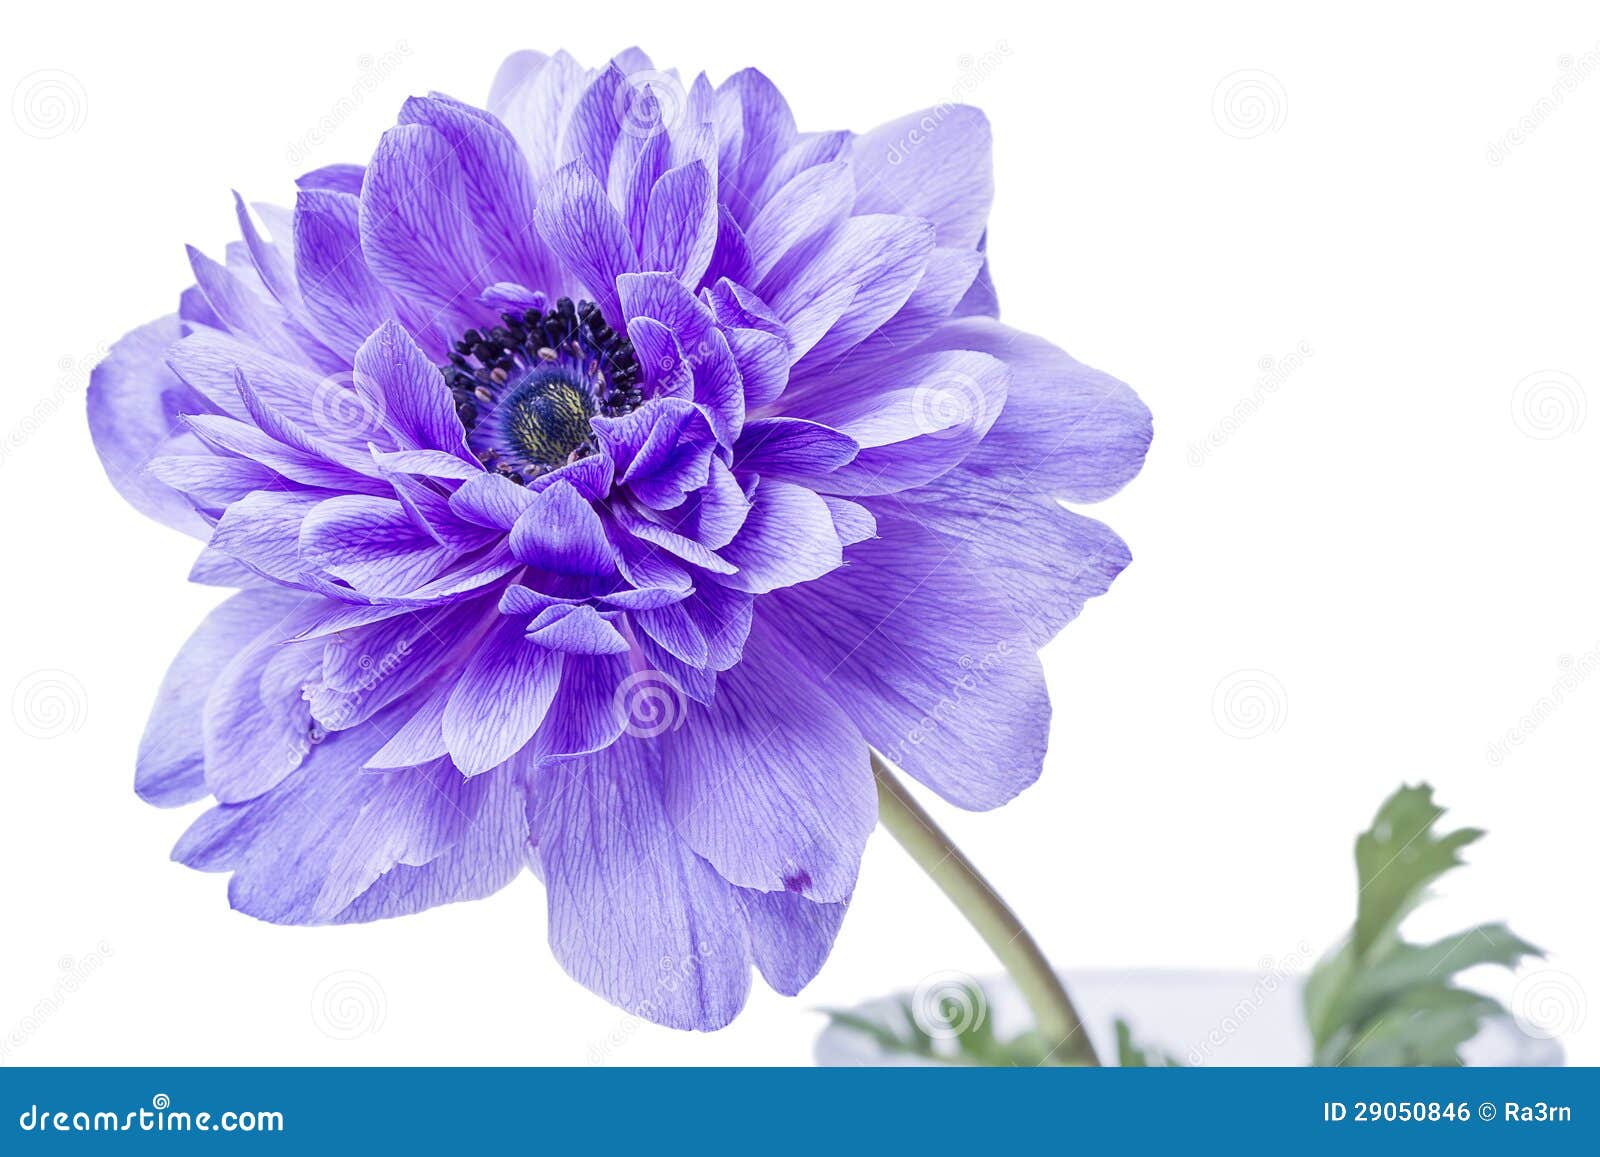 Blue Flower on white stock photo. Image of beauty, cultivated - 29050846